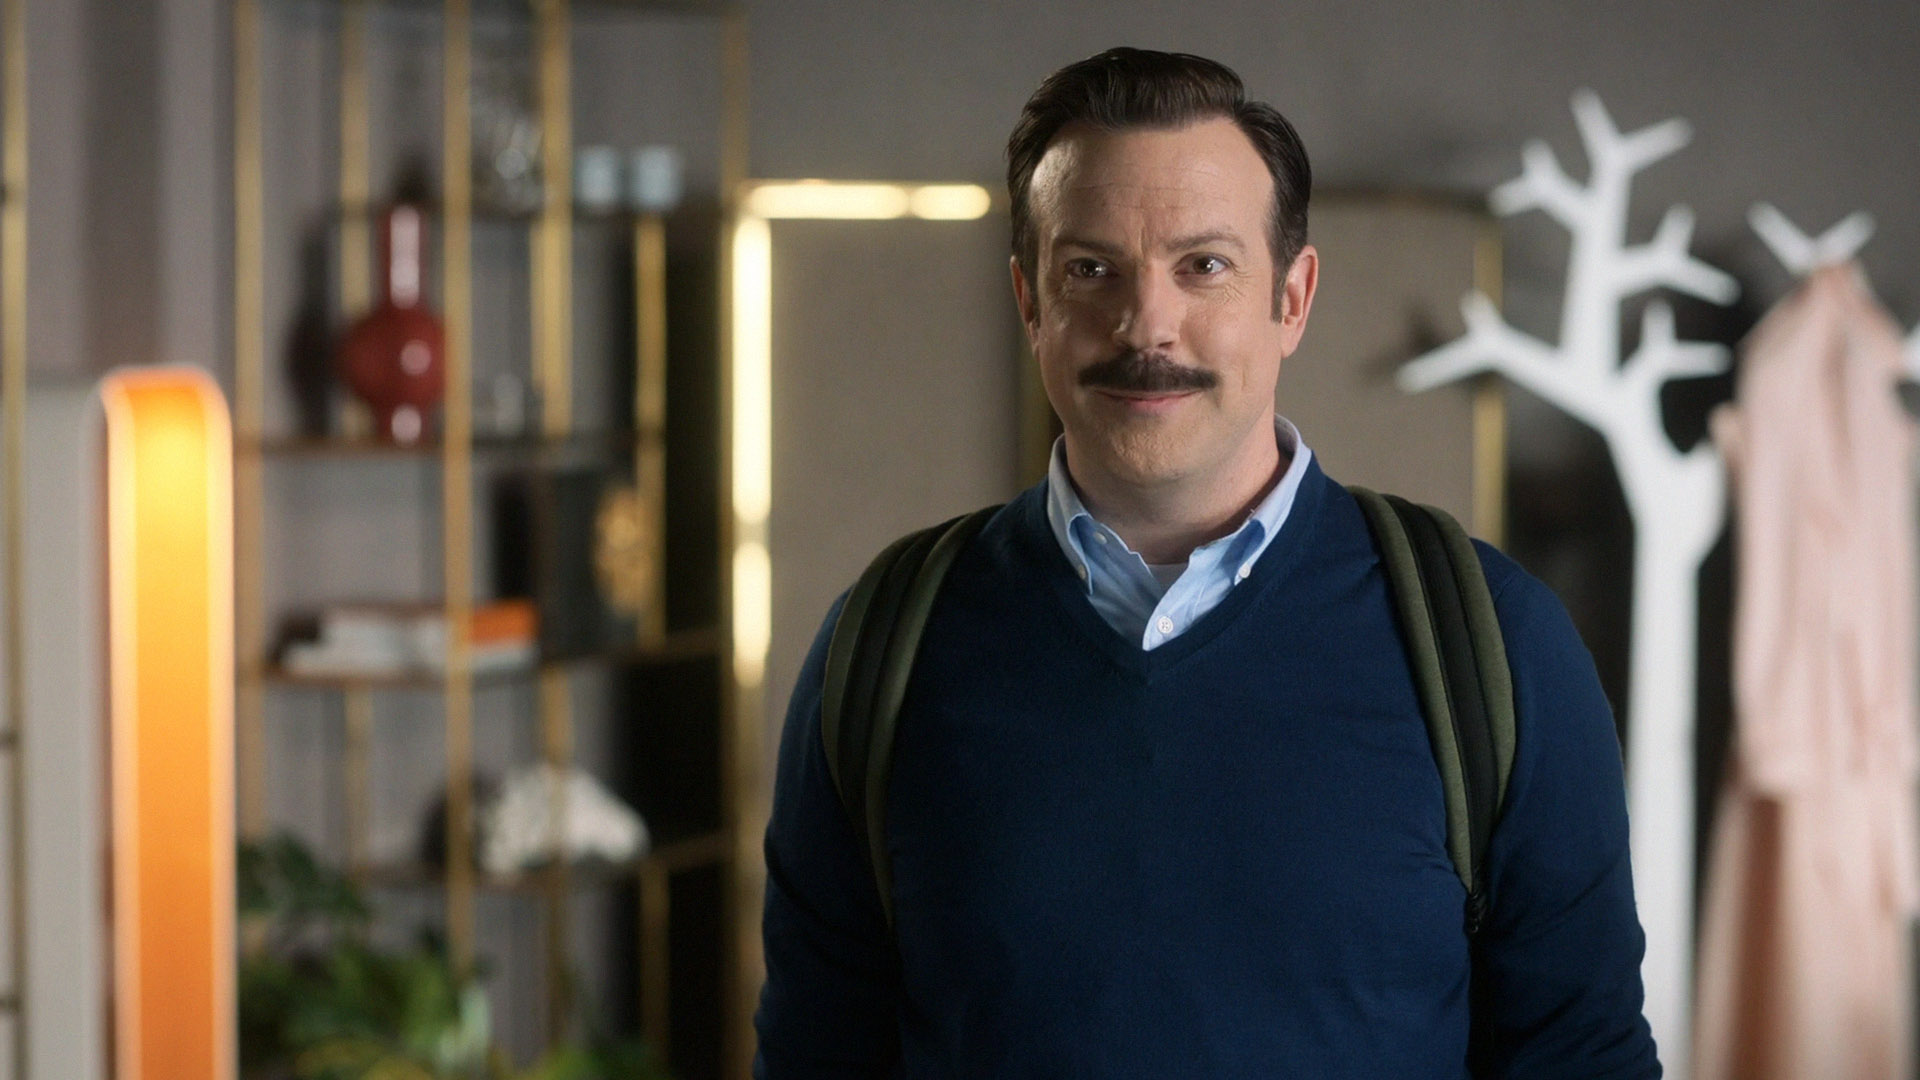 5 Ways Ted Lasso Can Continue Without Jason Sudeikis' Character